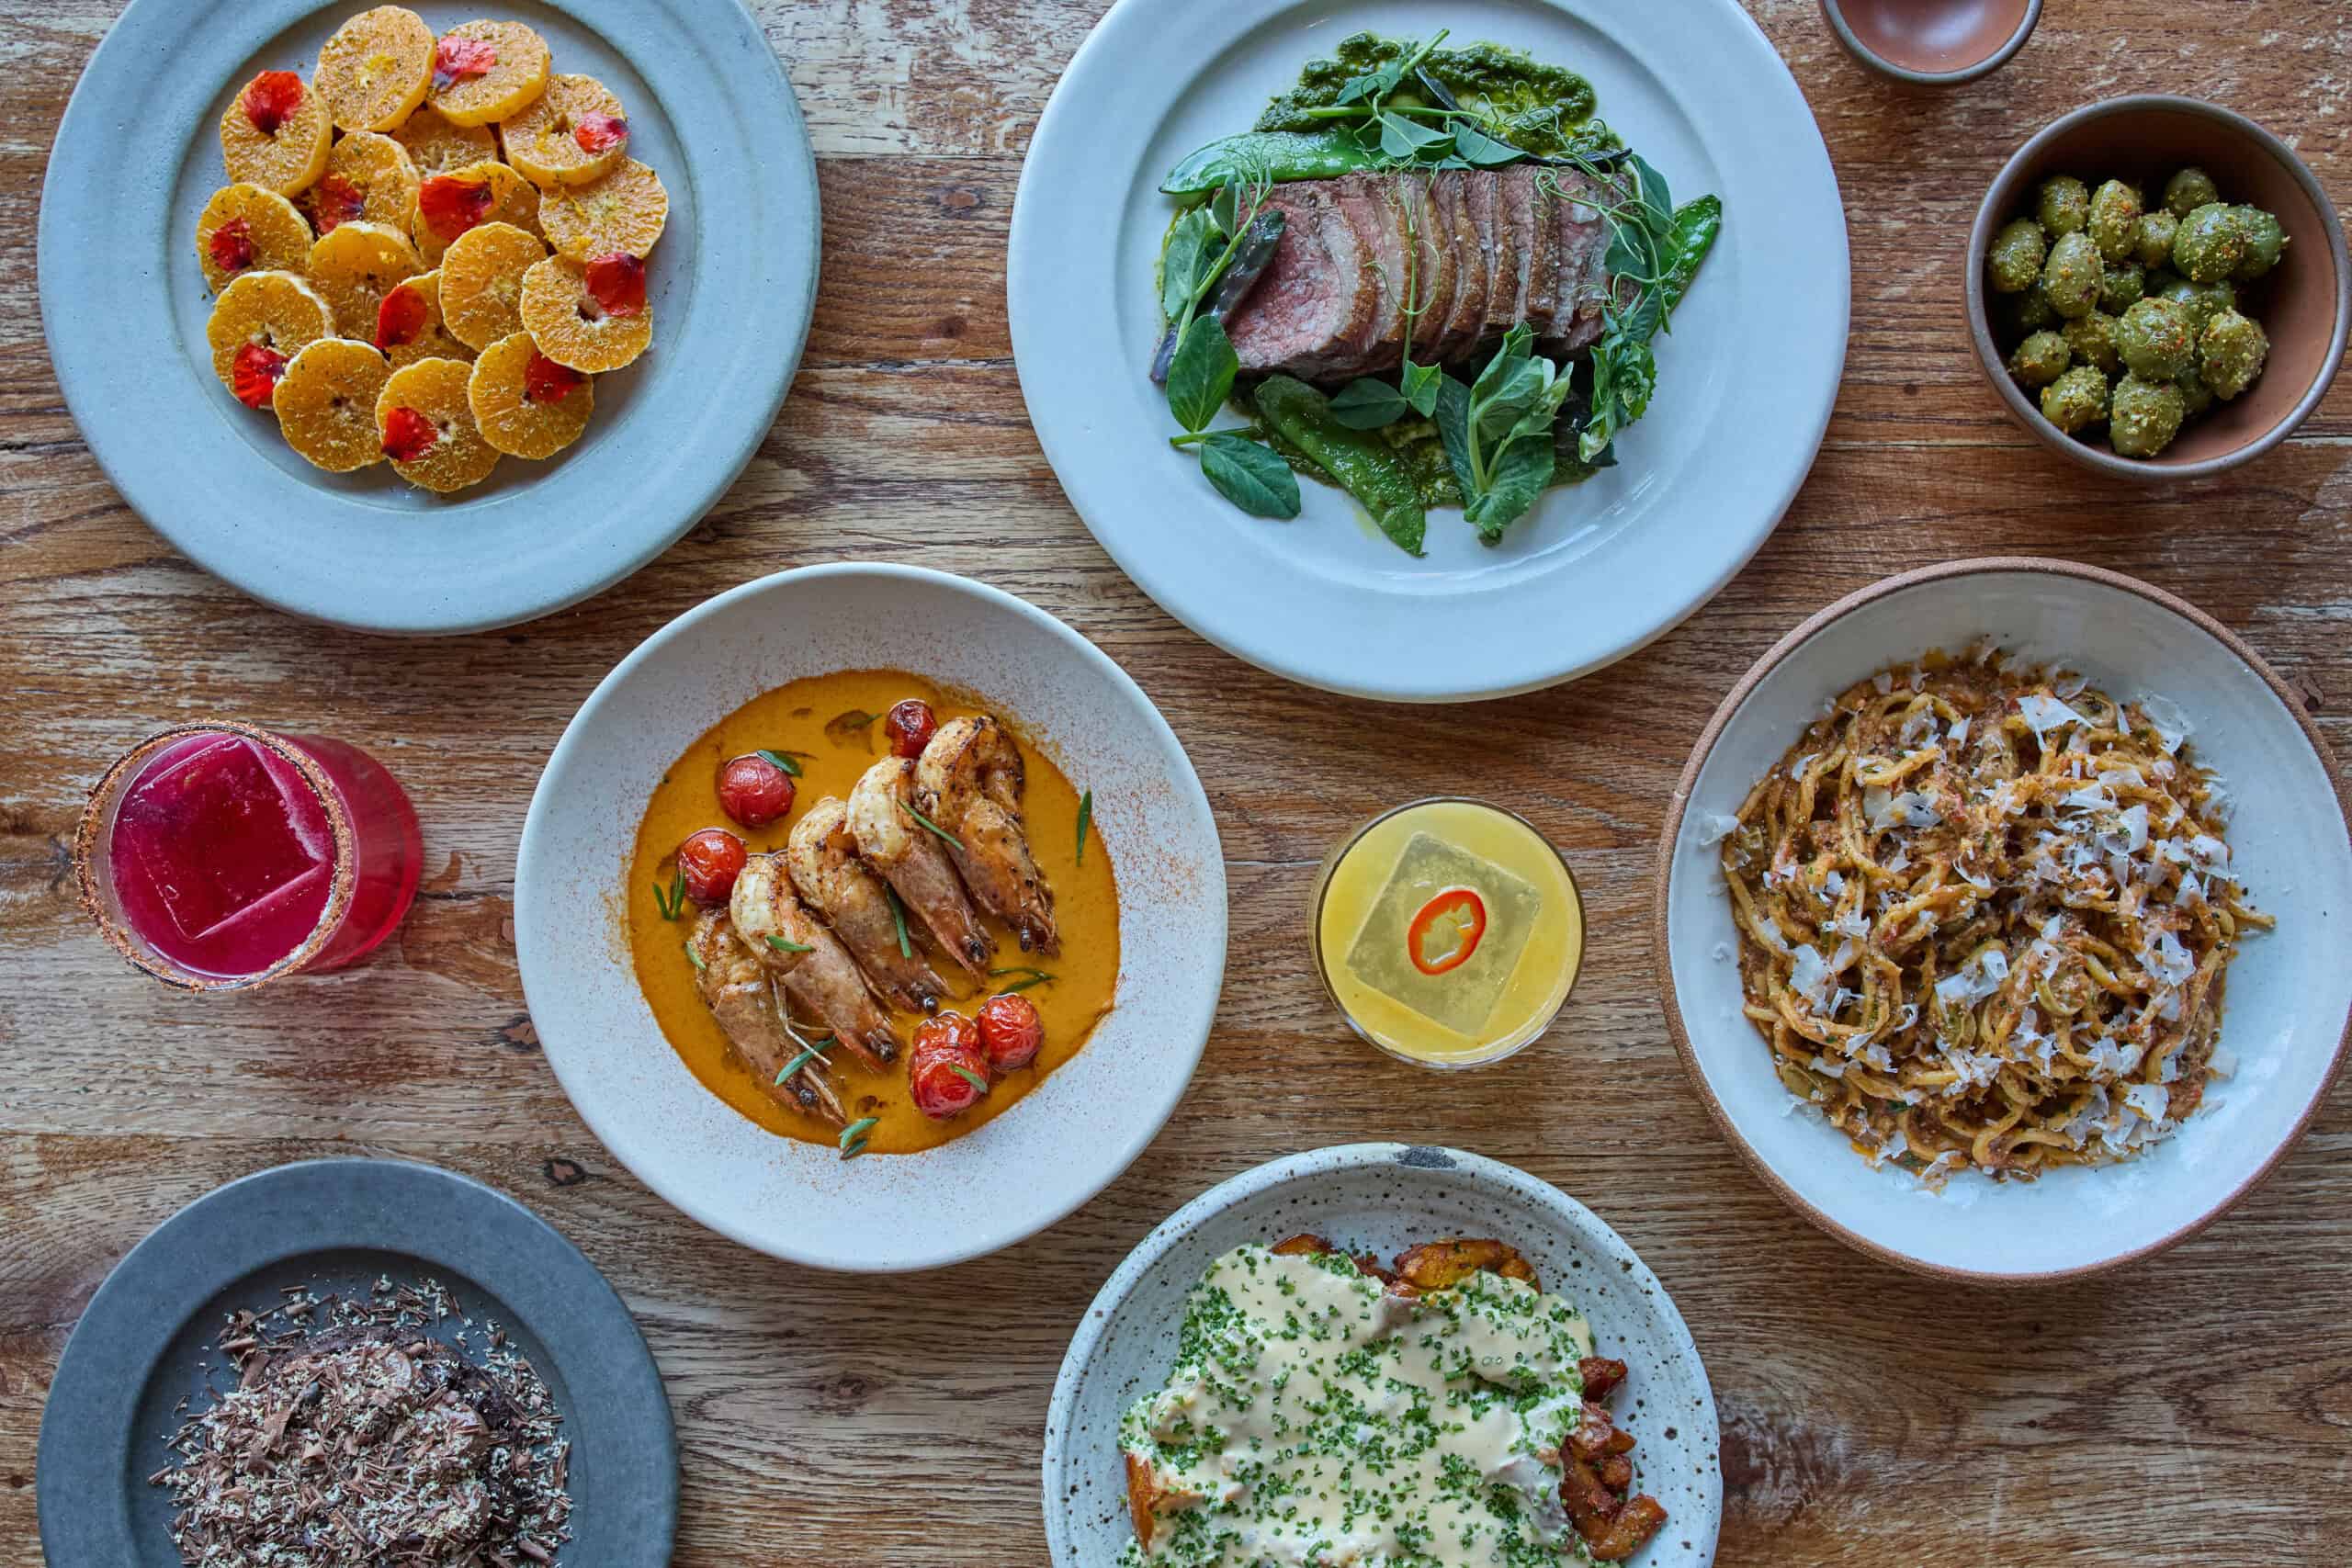 a variety of dishes made with ingredients from the Santa Monica farmer's market